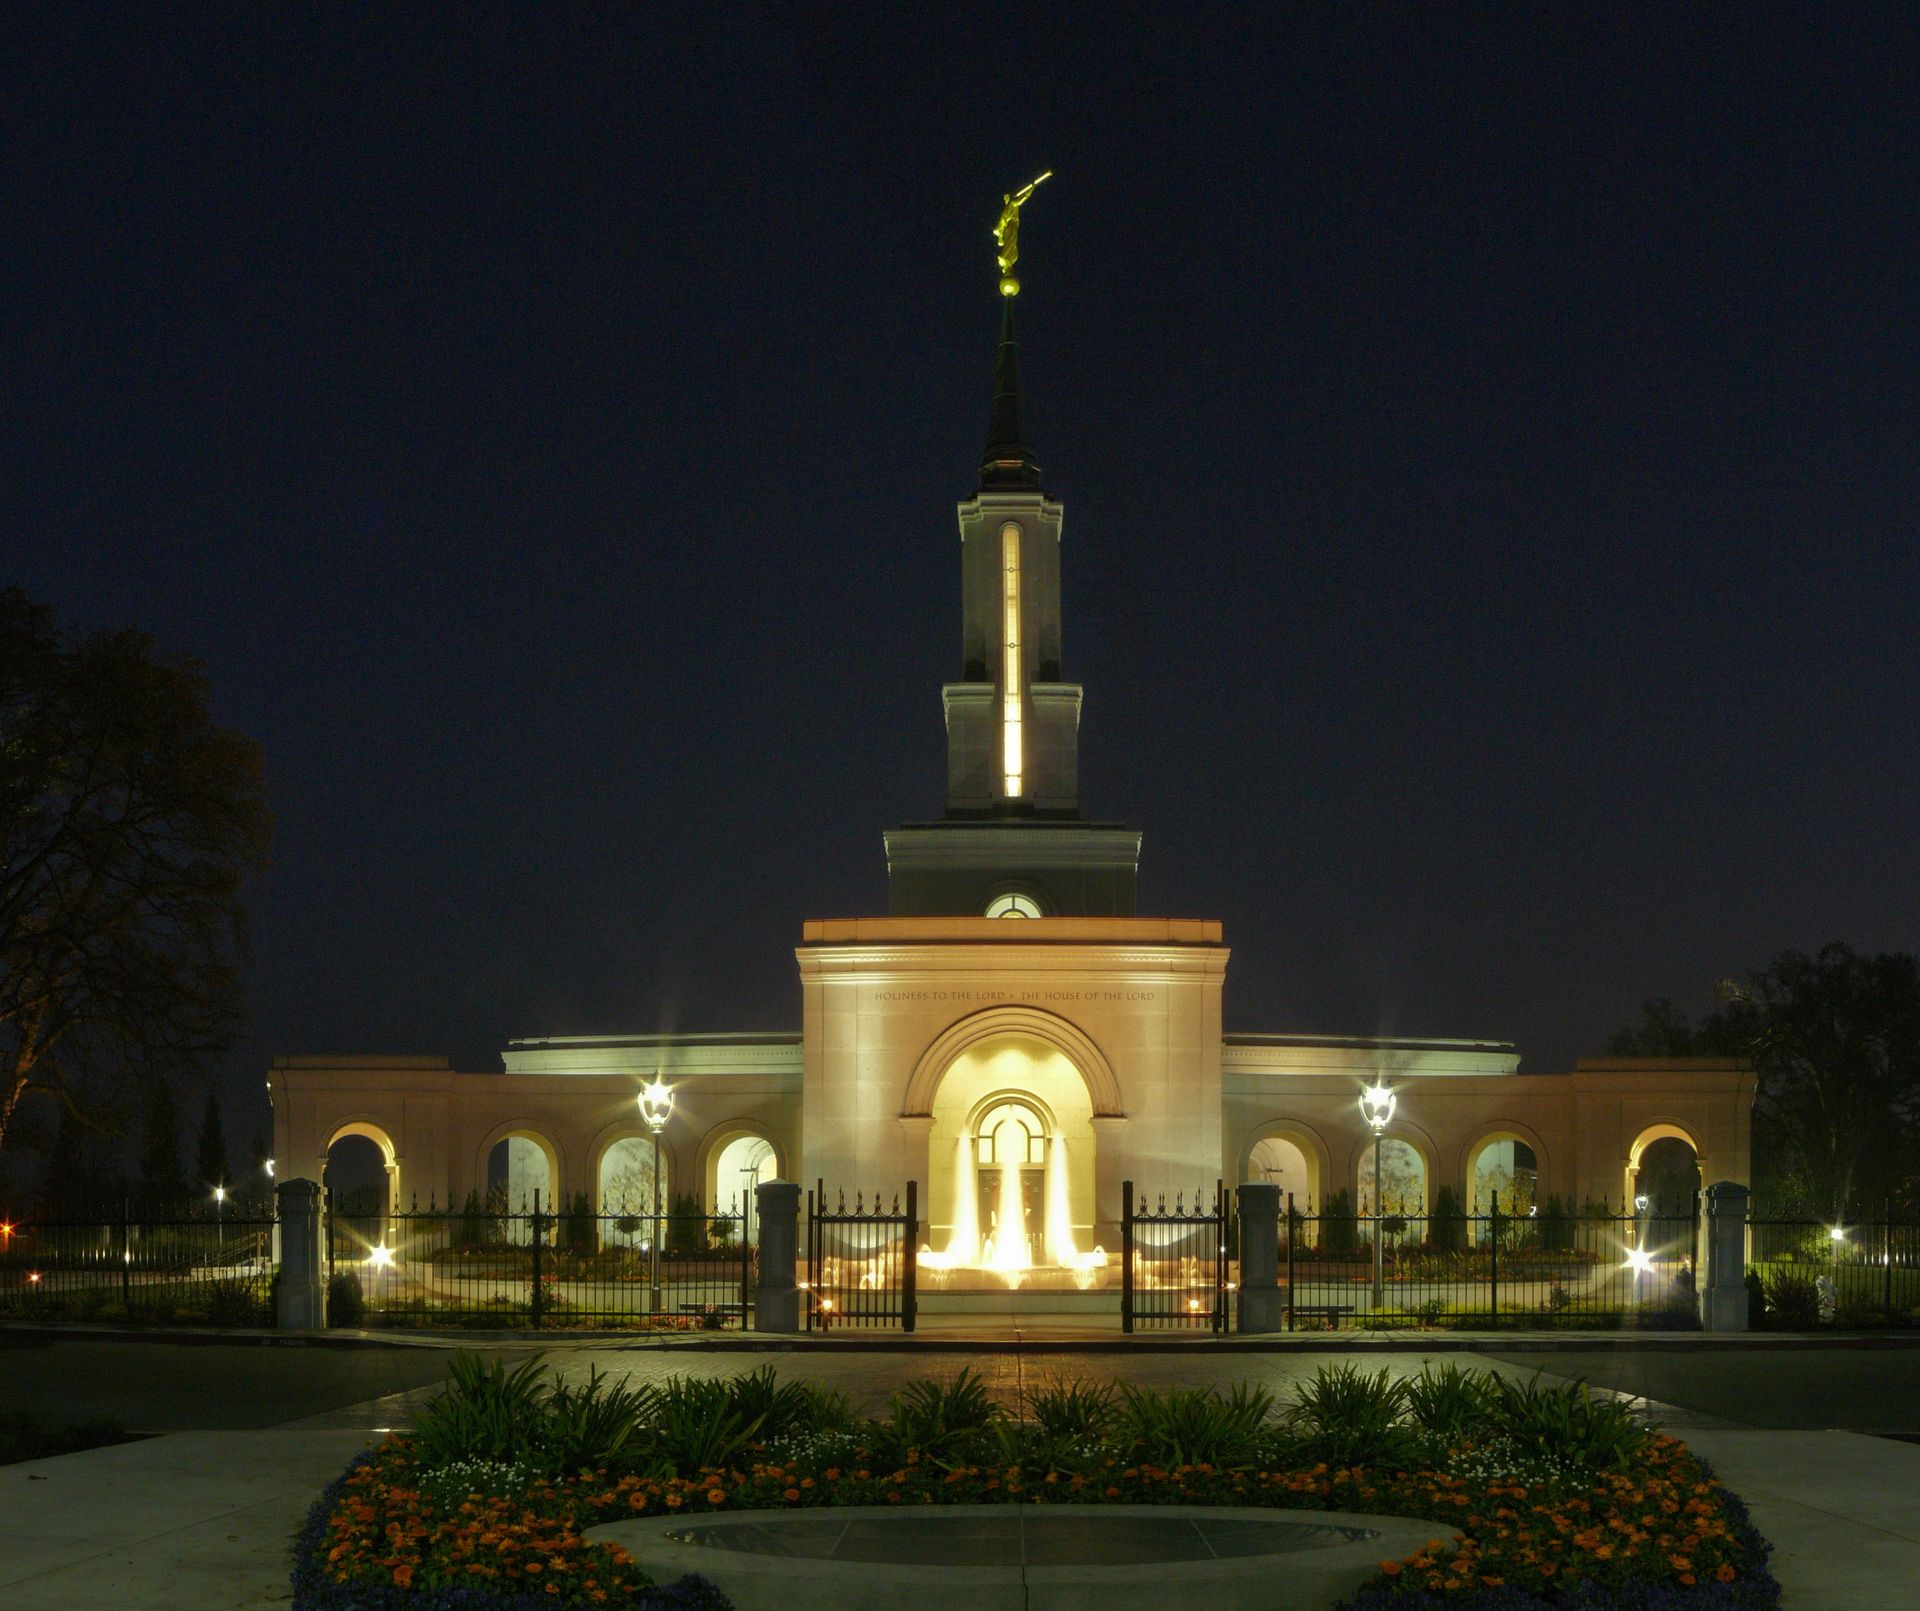 The Sacramento California Temple in the evening, including the fountains and entrance.